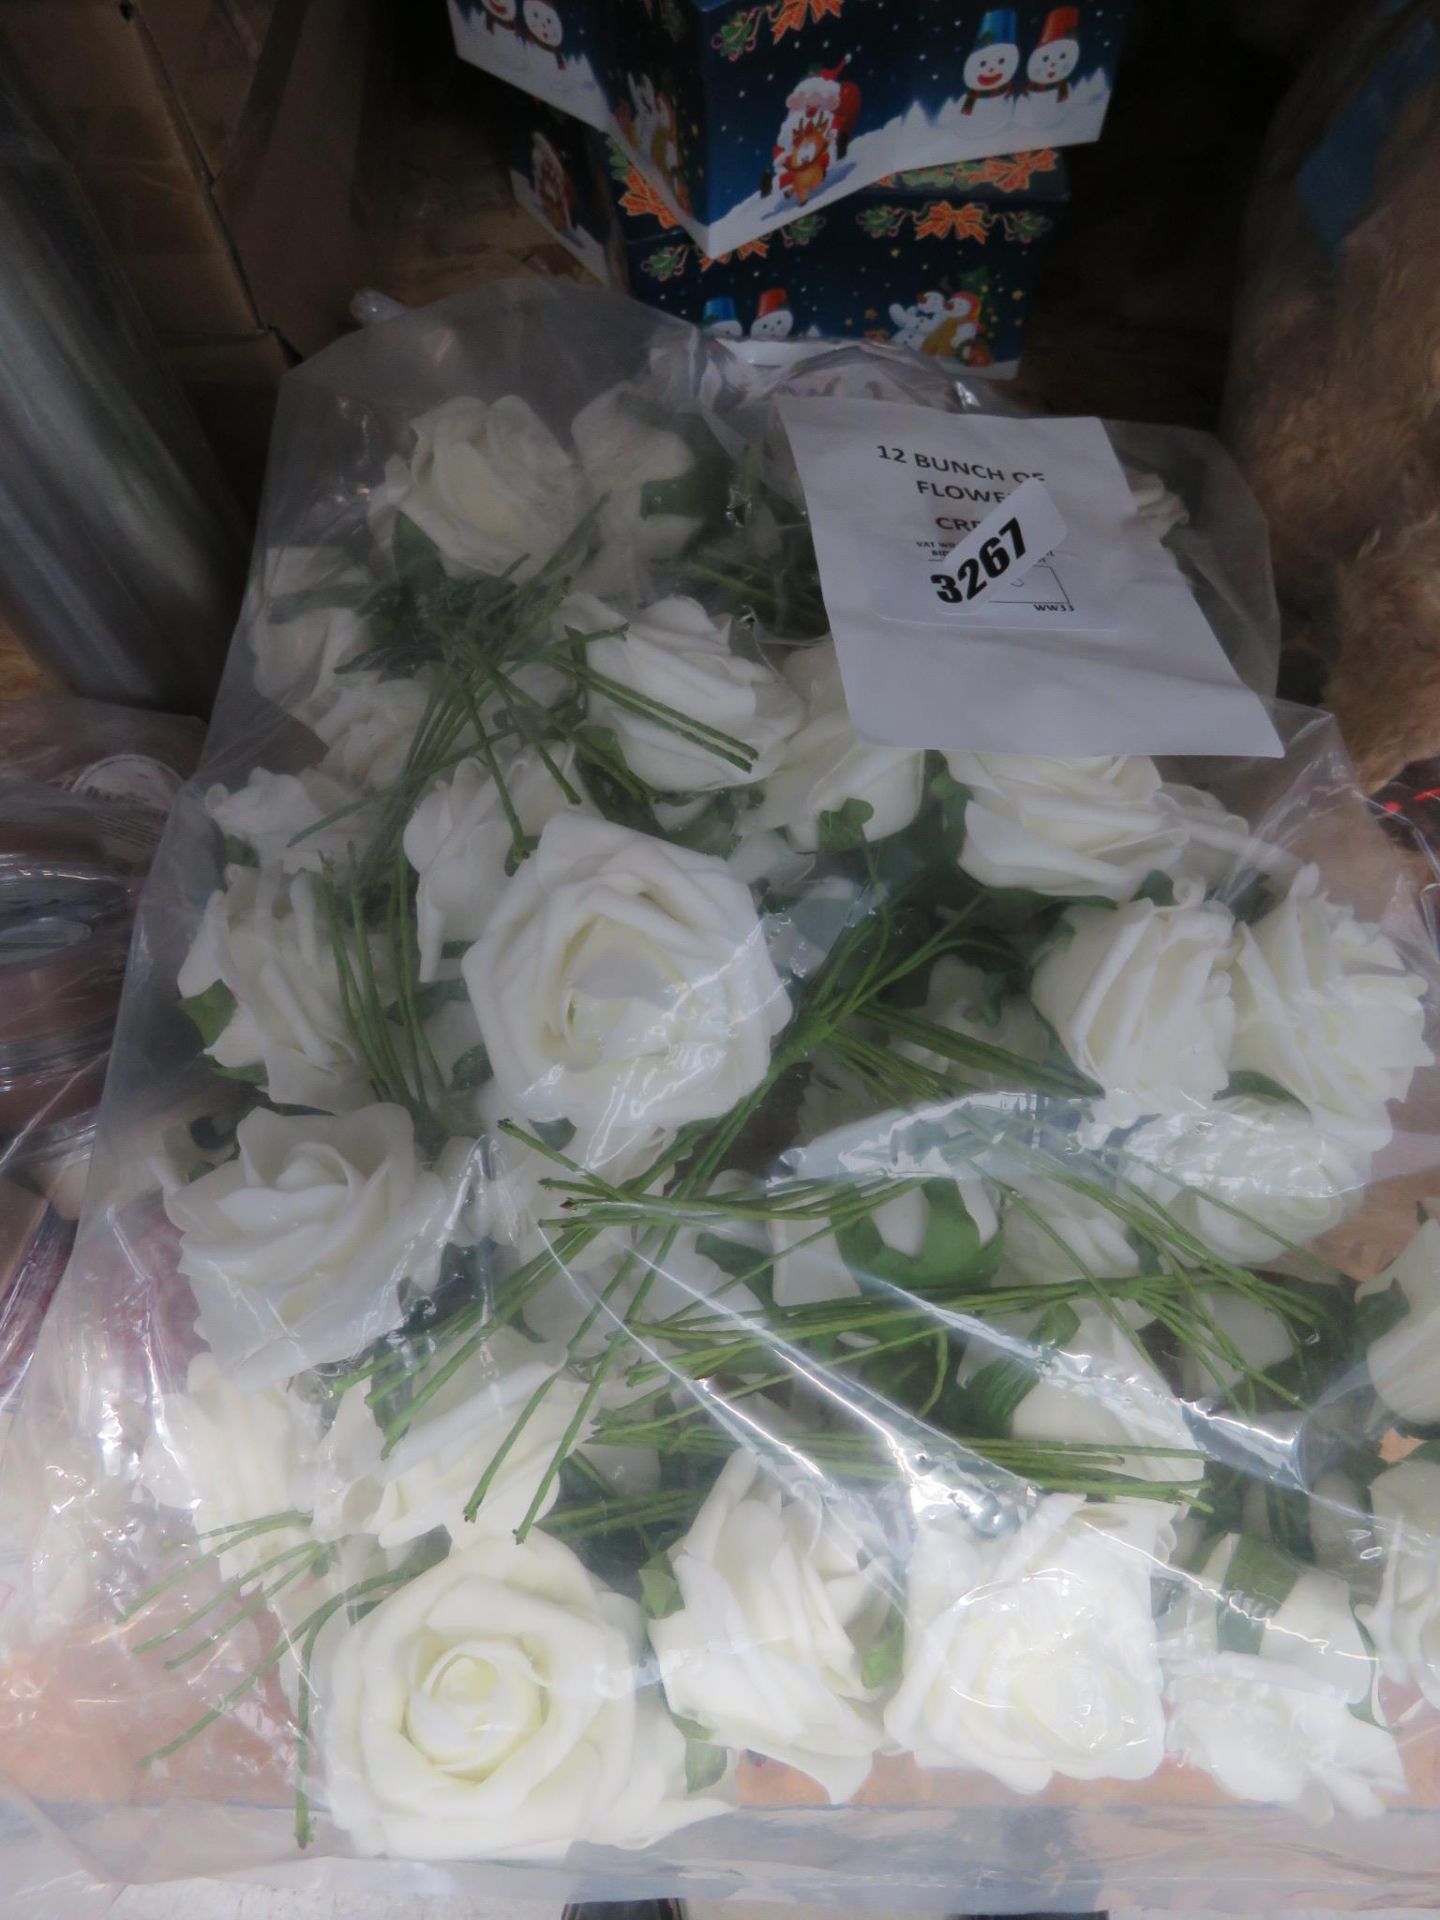 12 bunches of flowers in cream